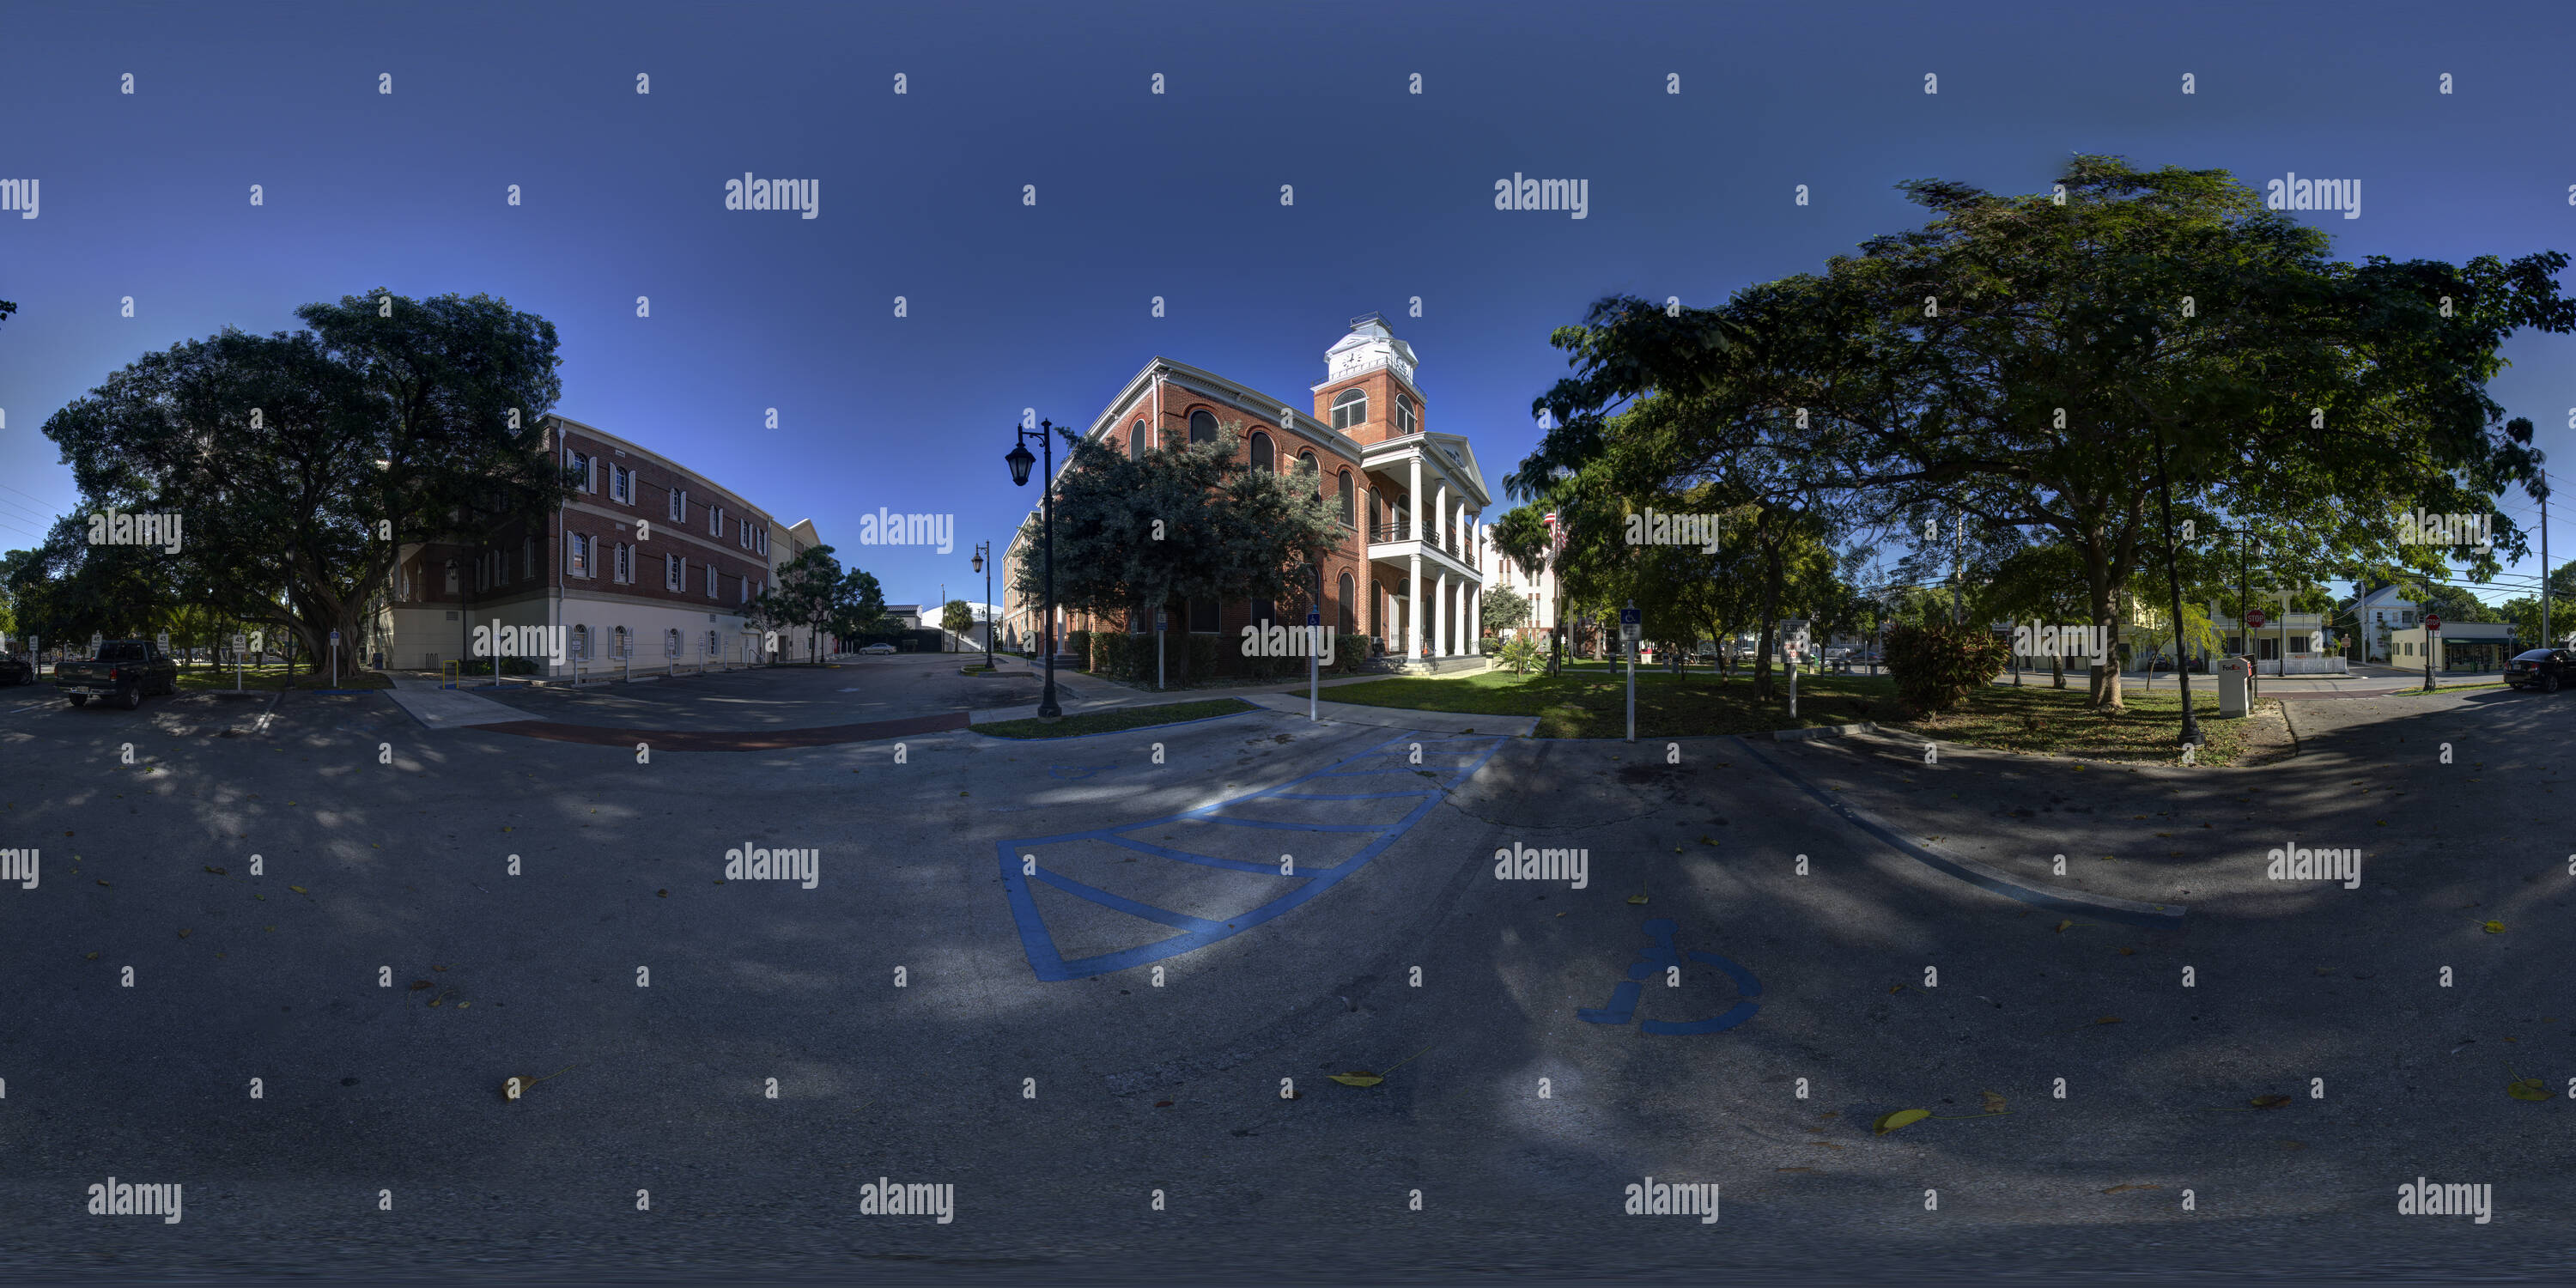 360° view of Monroe County Courthouse Key West Fl Alamy